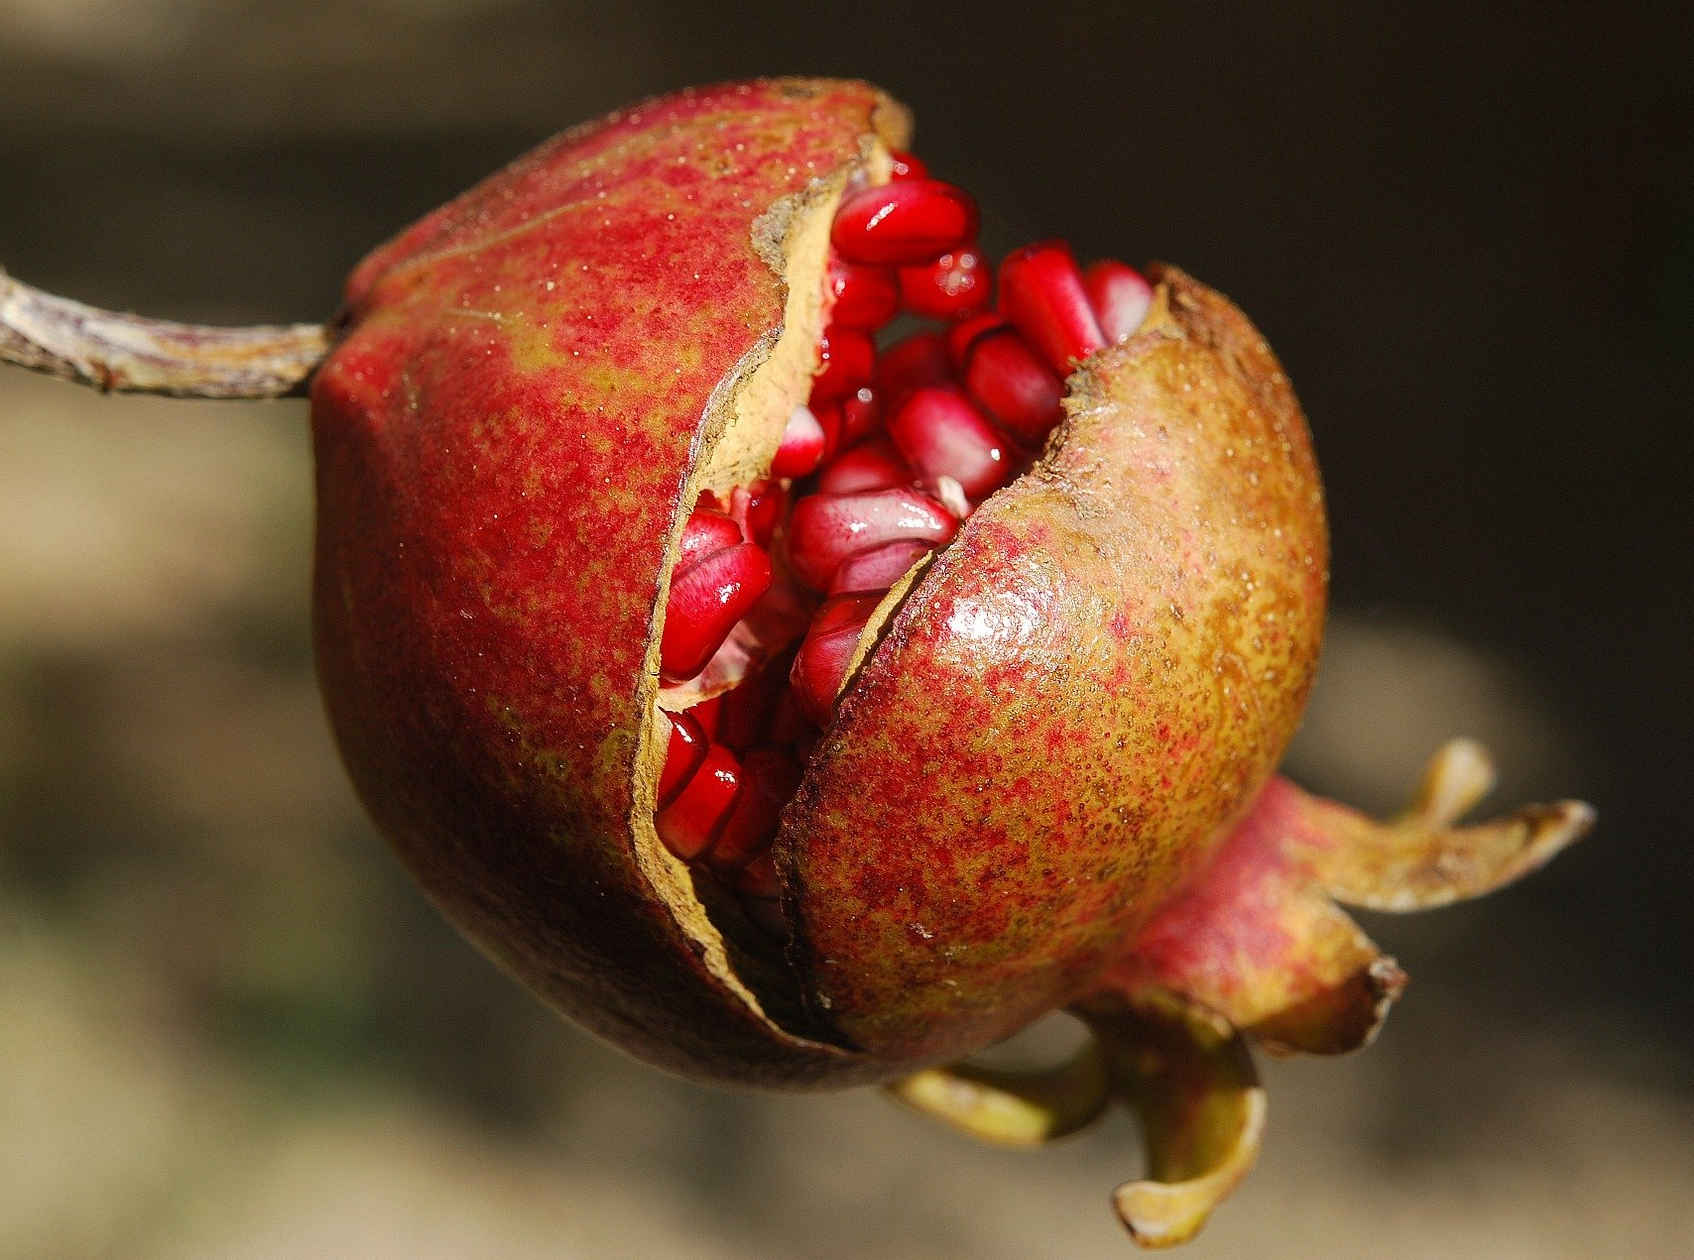 Pomegranate cracked open